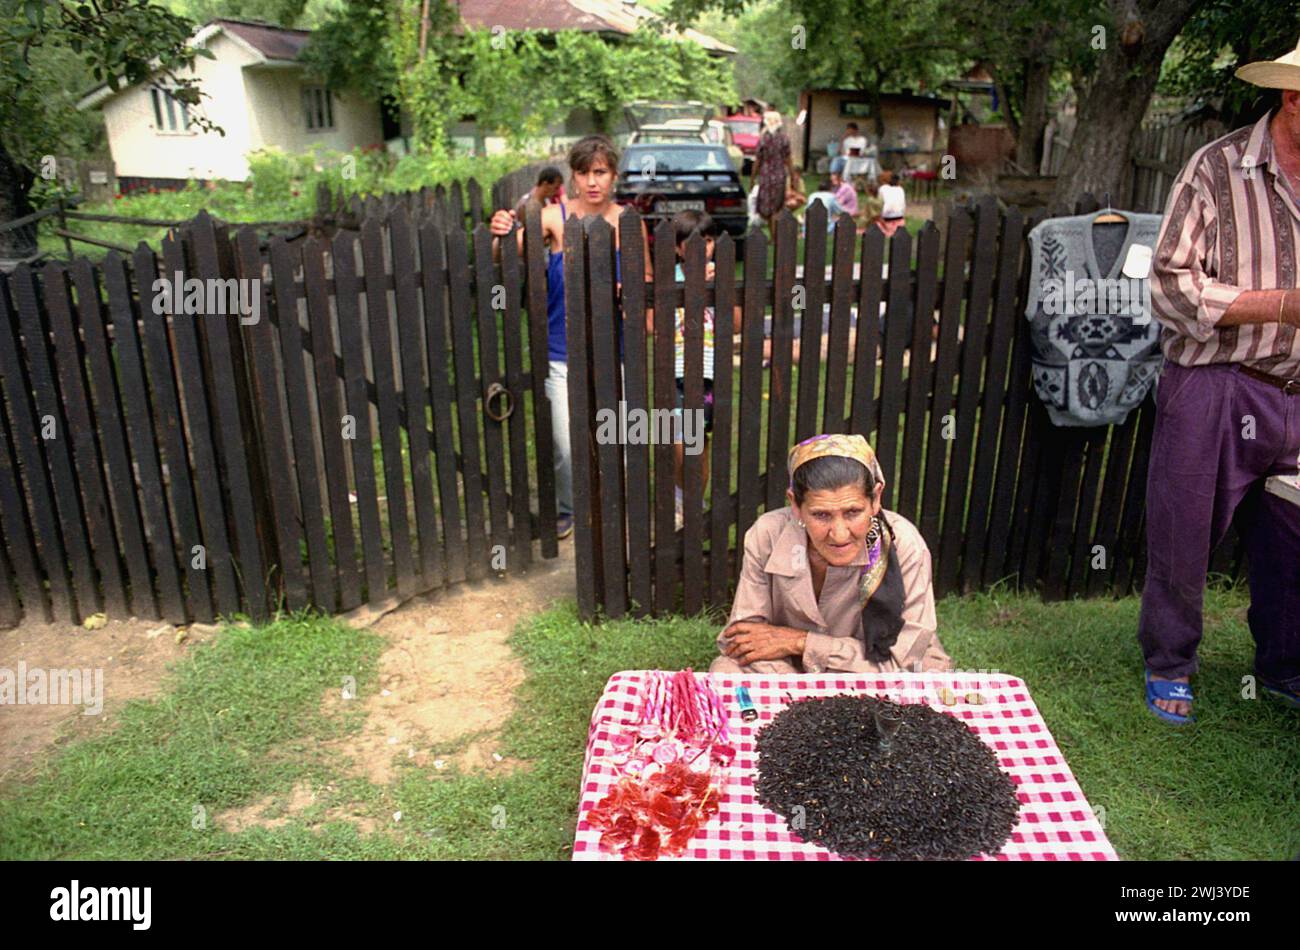 Vrancea County, Romania, approx. 1998. Elderly woman selling sunflower seeds and candies at a country fair. Stock Photo